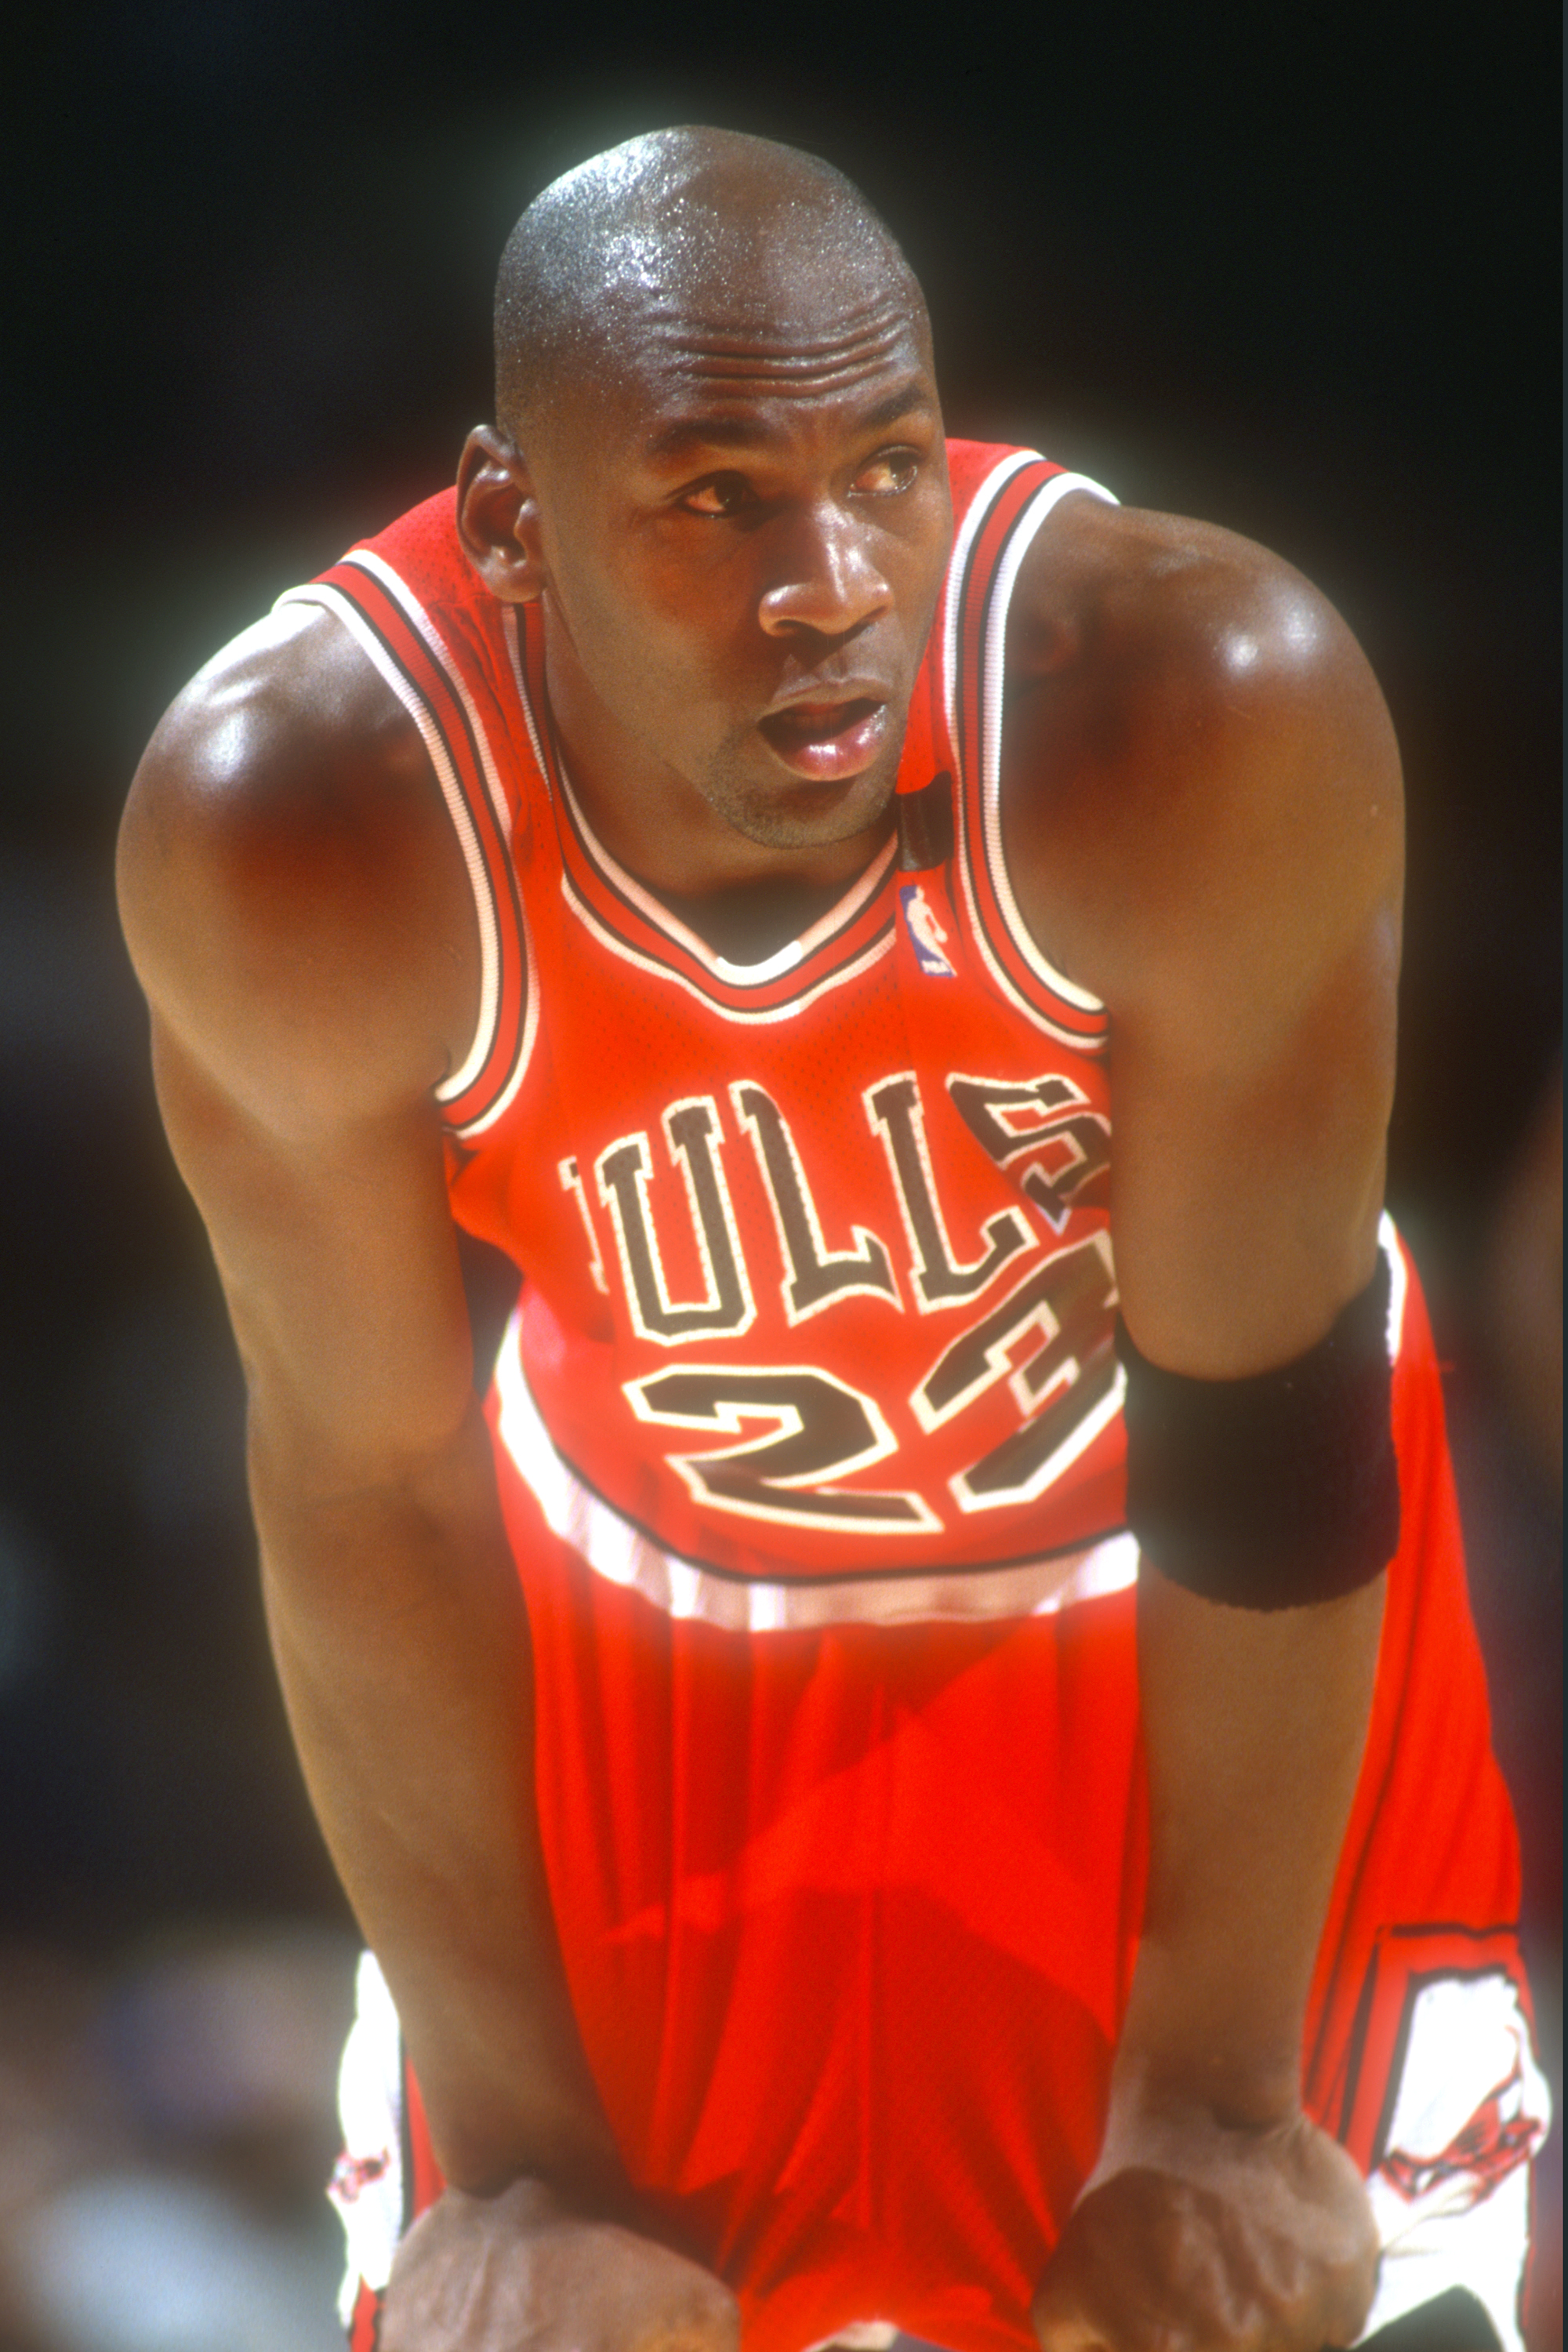 Michael Jordan during a basketball game at the Capital Centre on December 14, 1991 in Landover, Maryland | Source: Getty Images